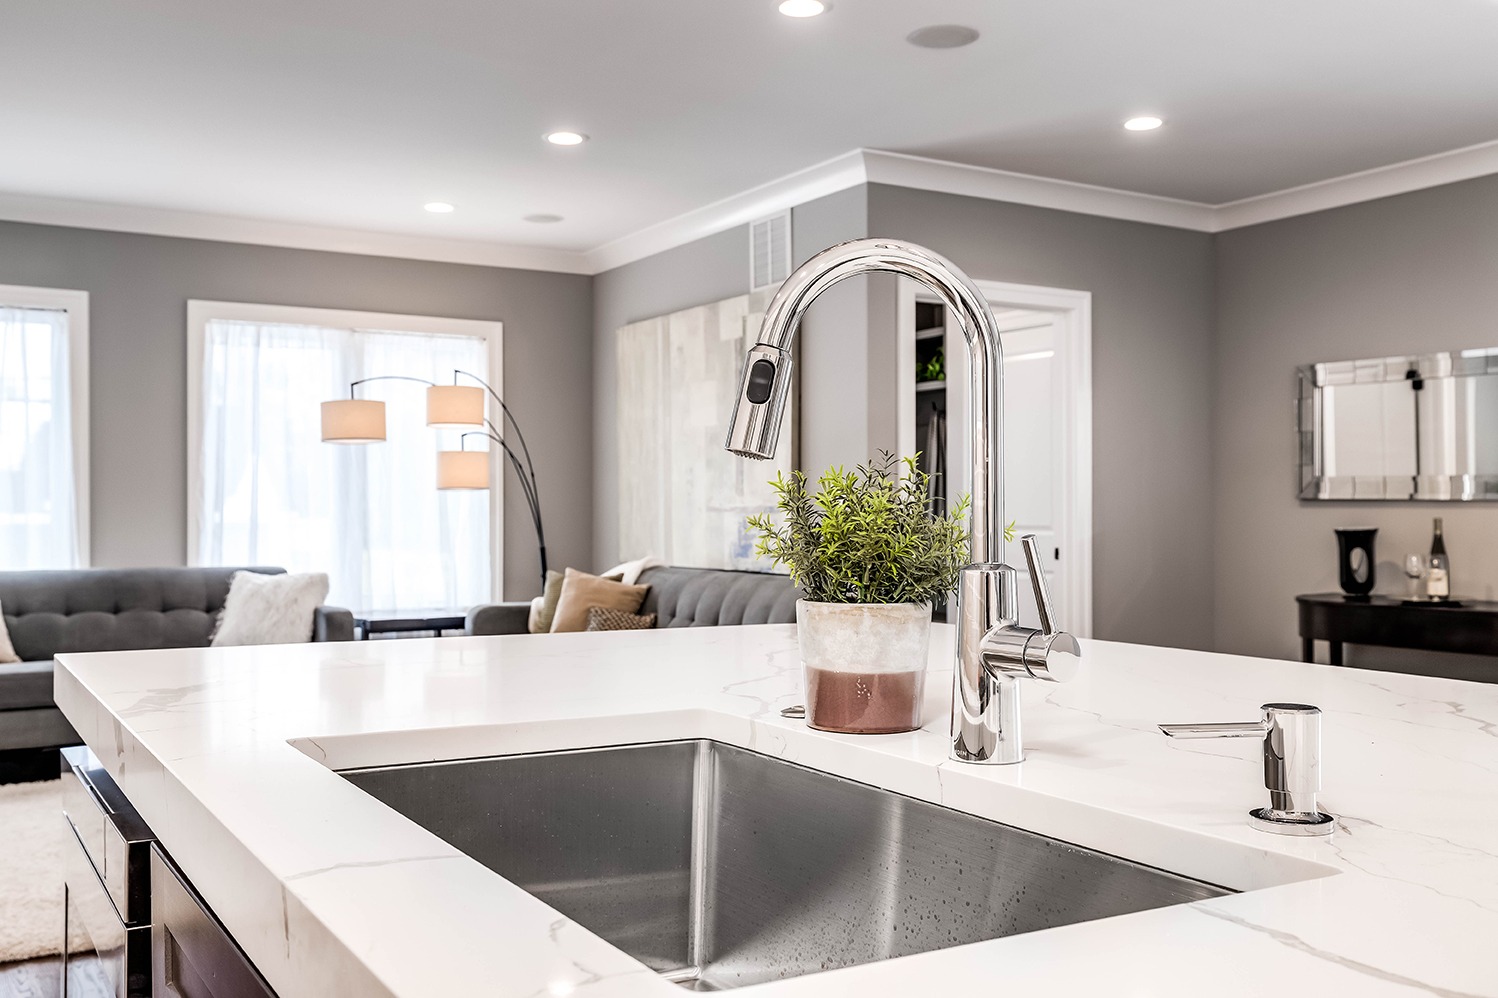 A kitchen sink in a luxurious home looking out towards a living room area. The kitchen island features a white granite and stainless steel tub.